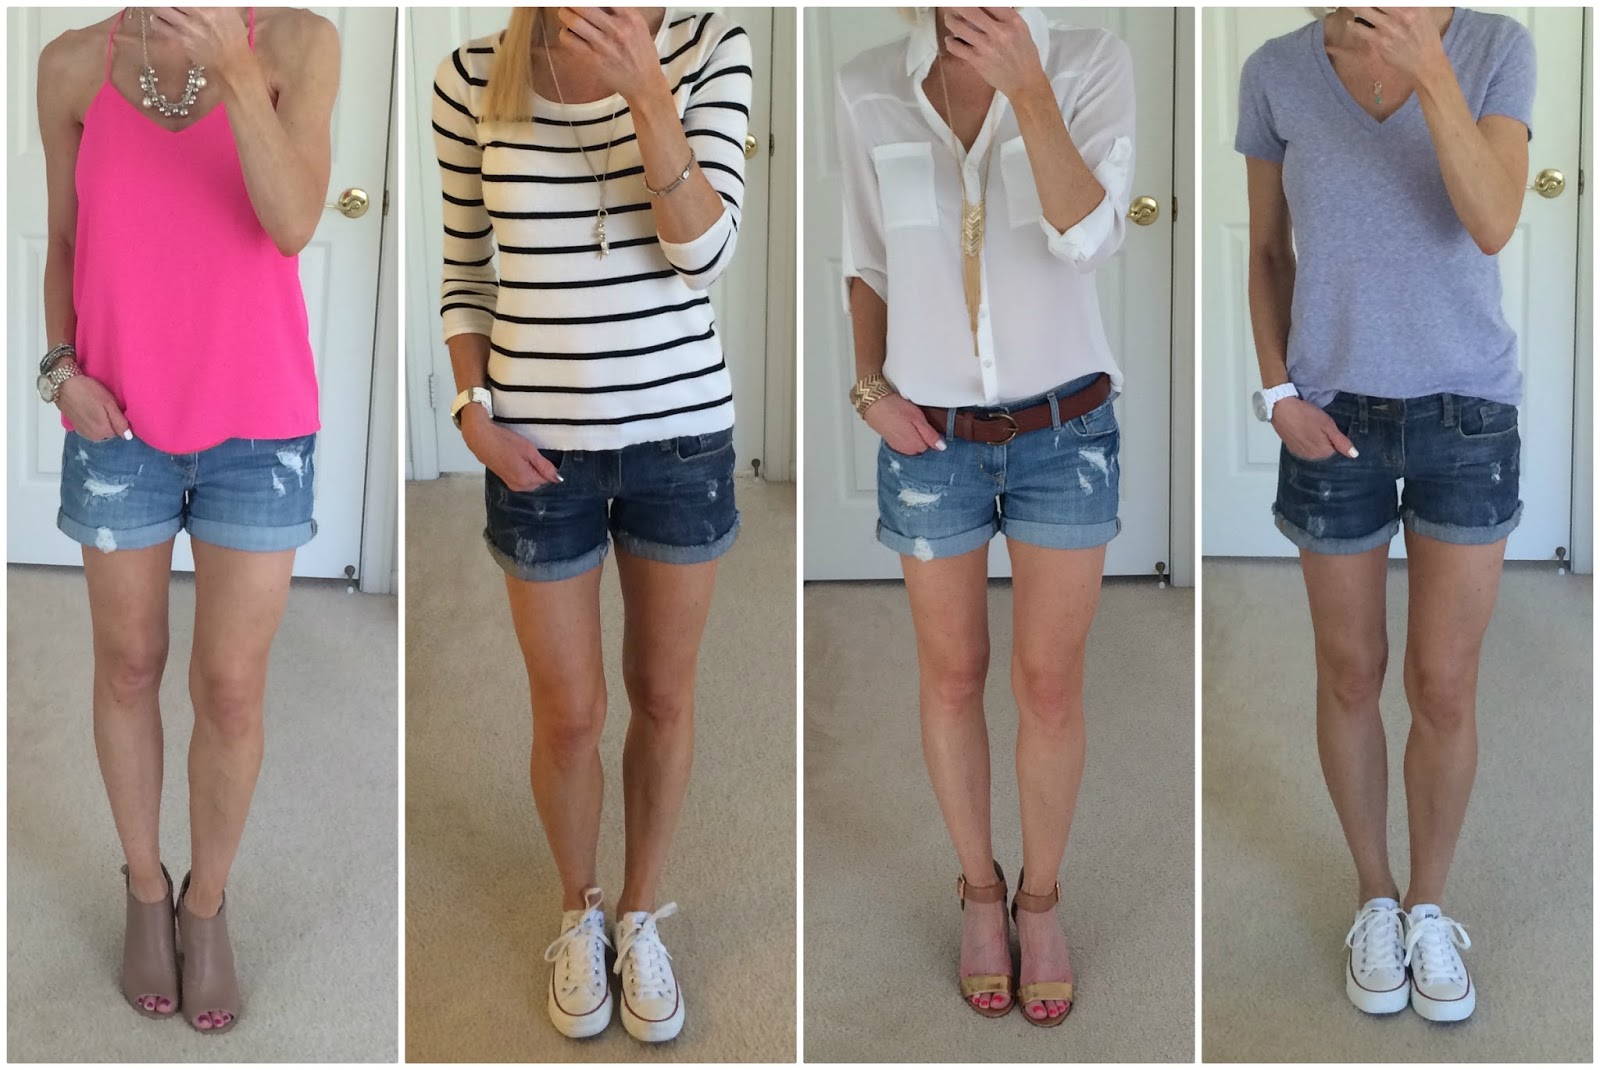 jean short outfits